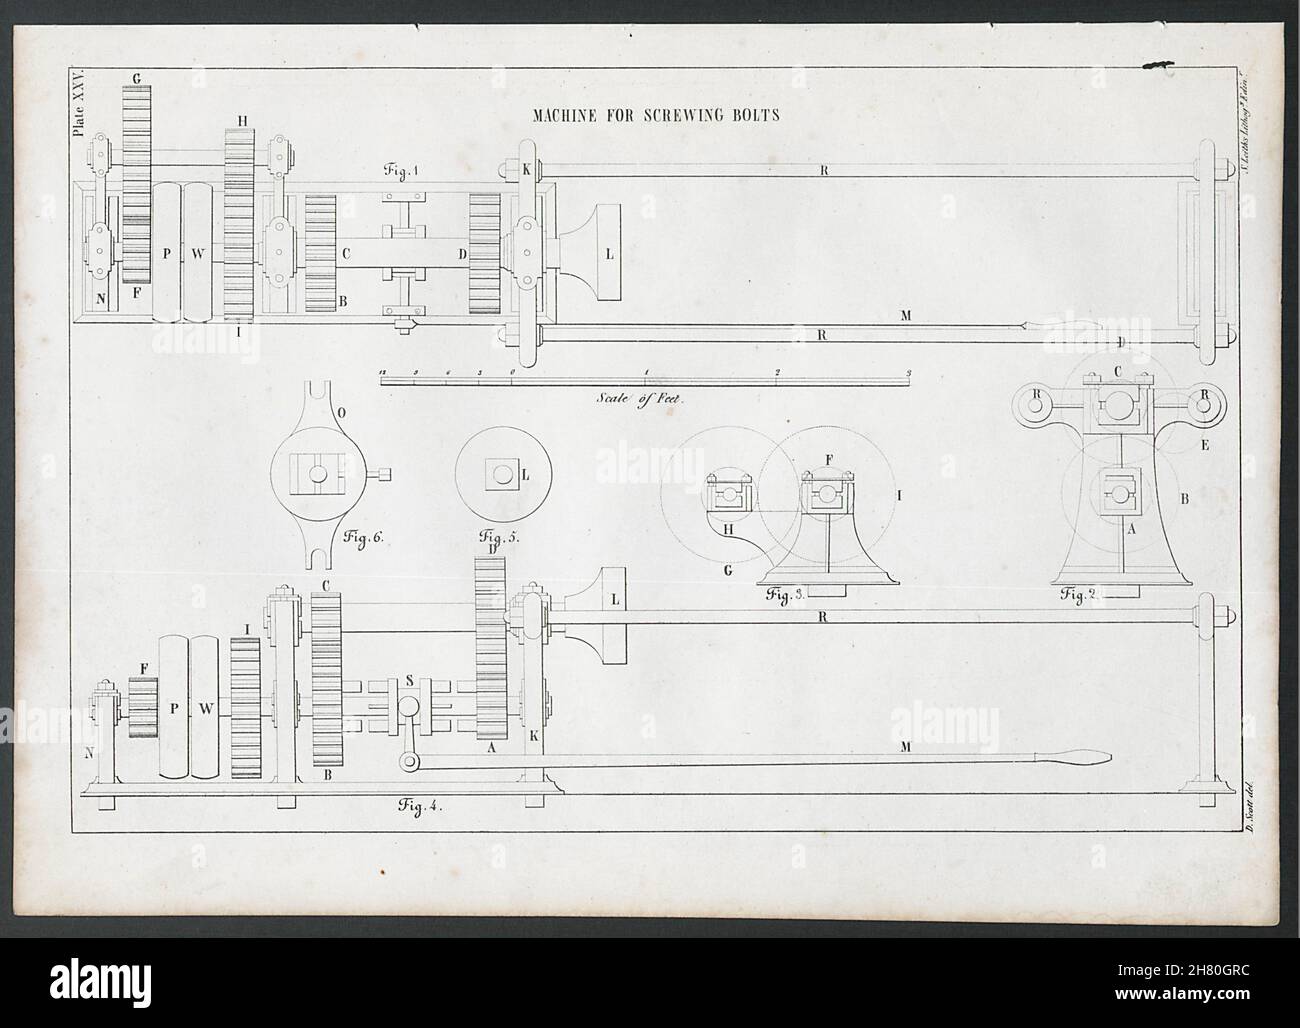 VICTORIAN ENGINEERING DRAWING Machine for Screwing Bolts 1847 old print Stock Photo